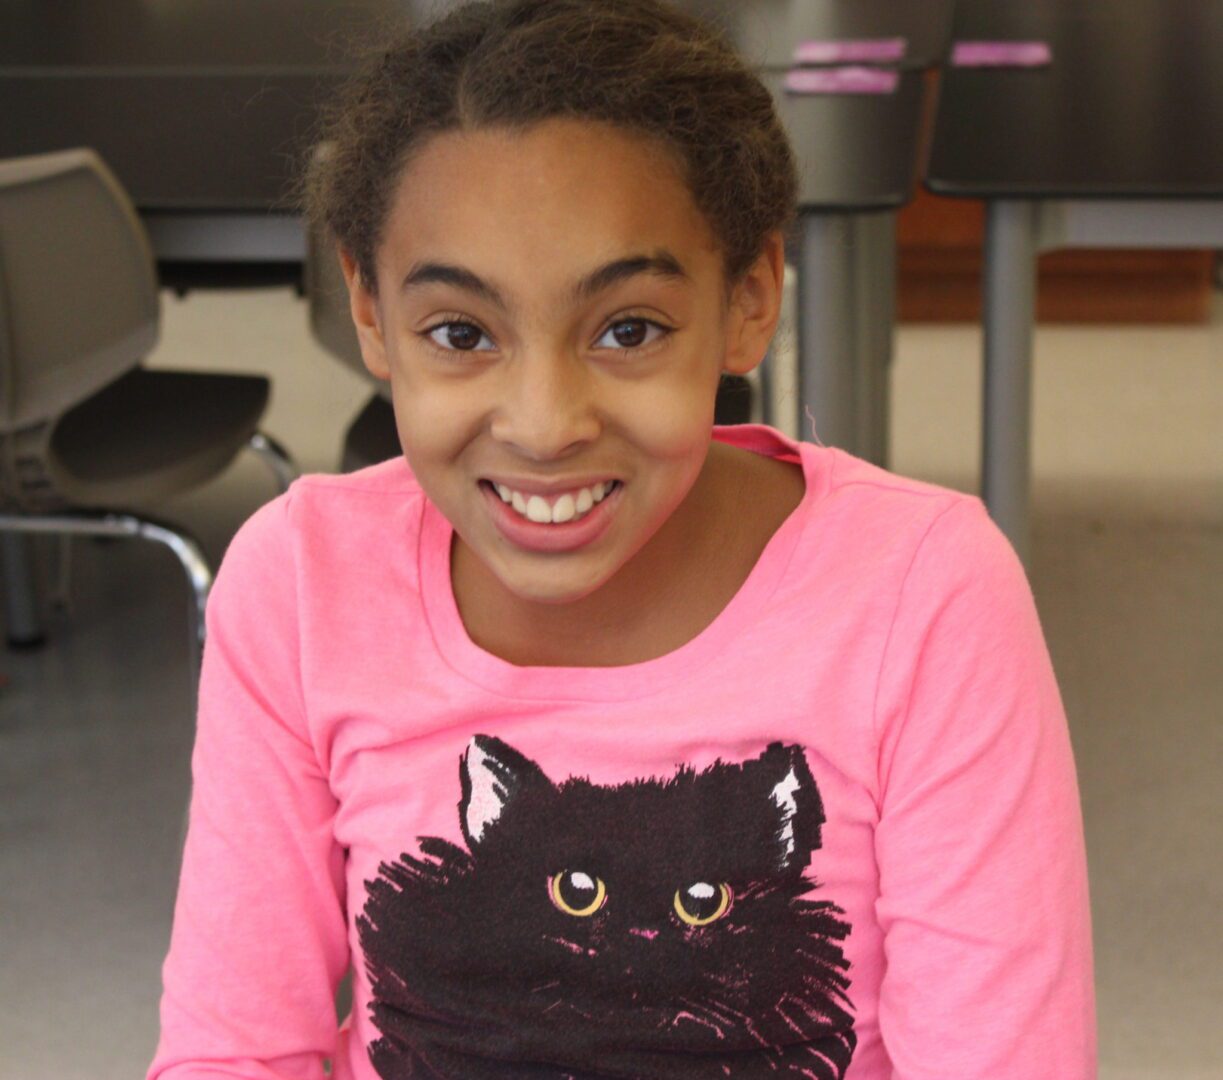 A girl wearing a pink shirt with a cat on it.